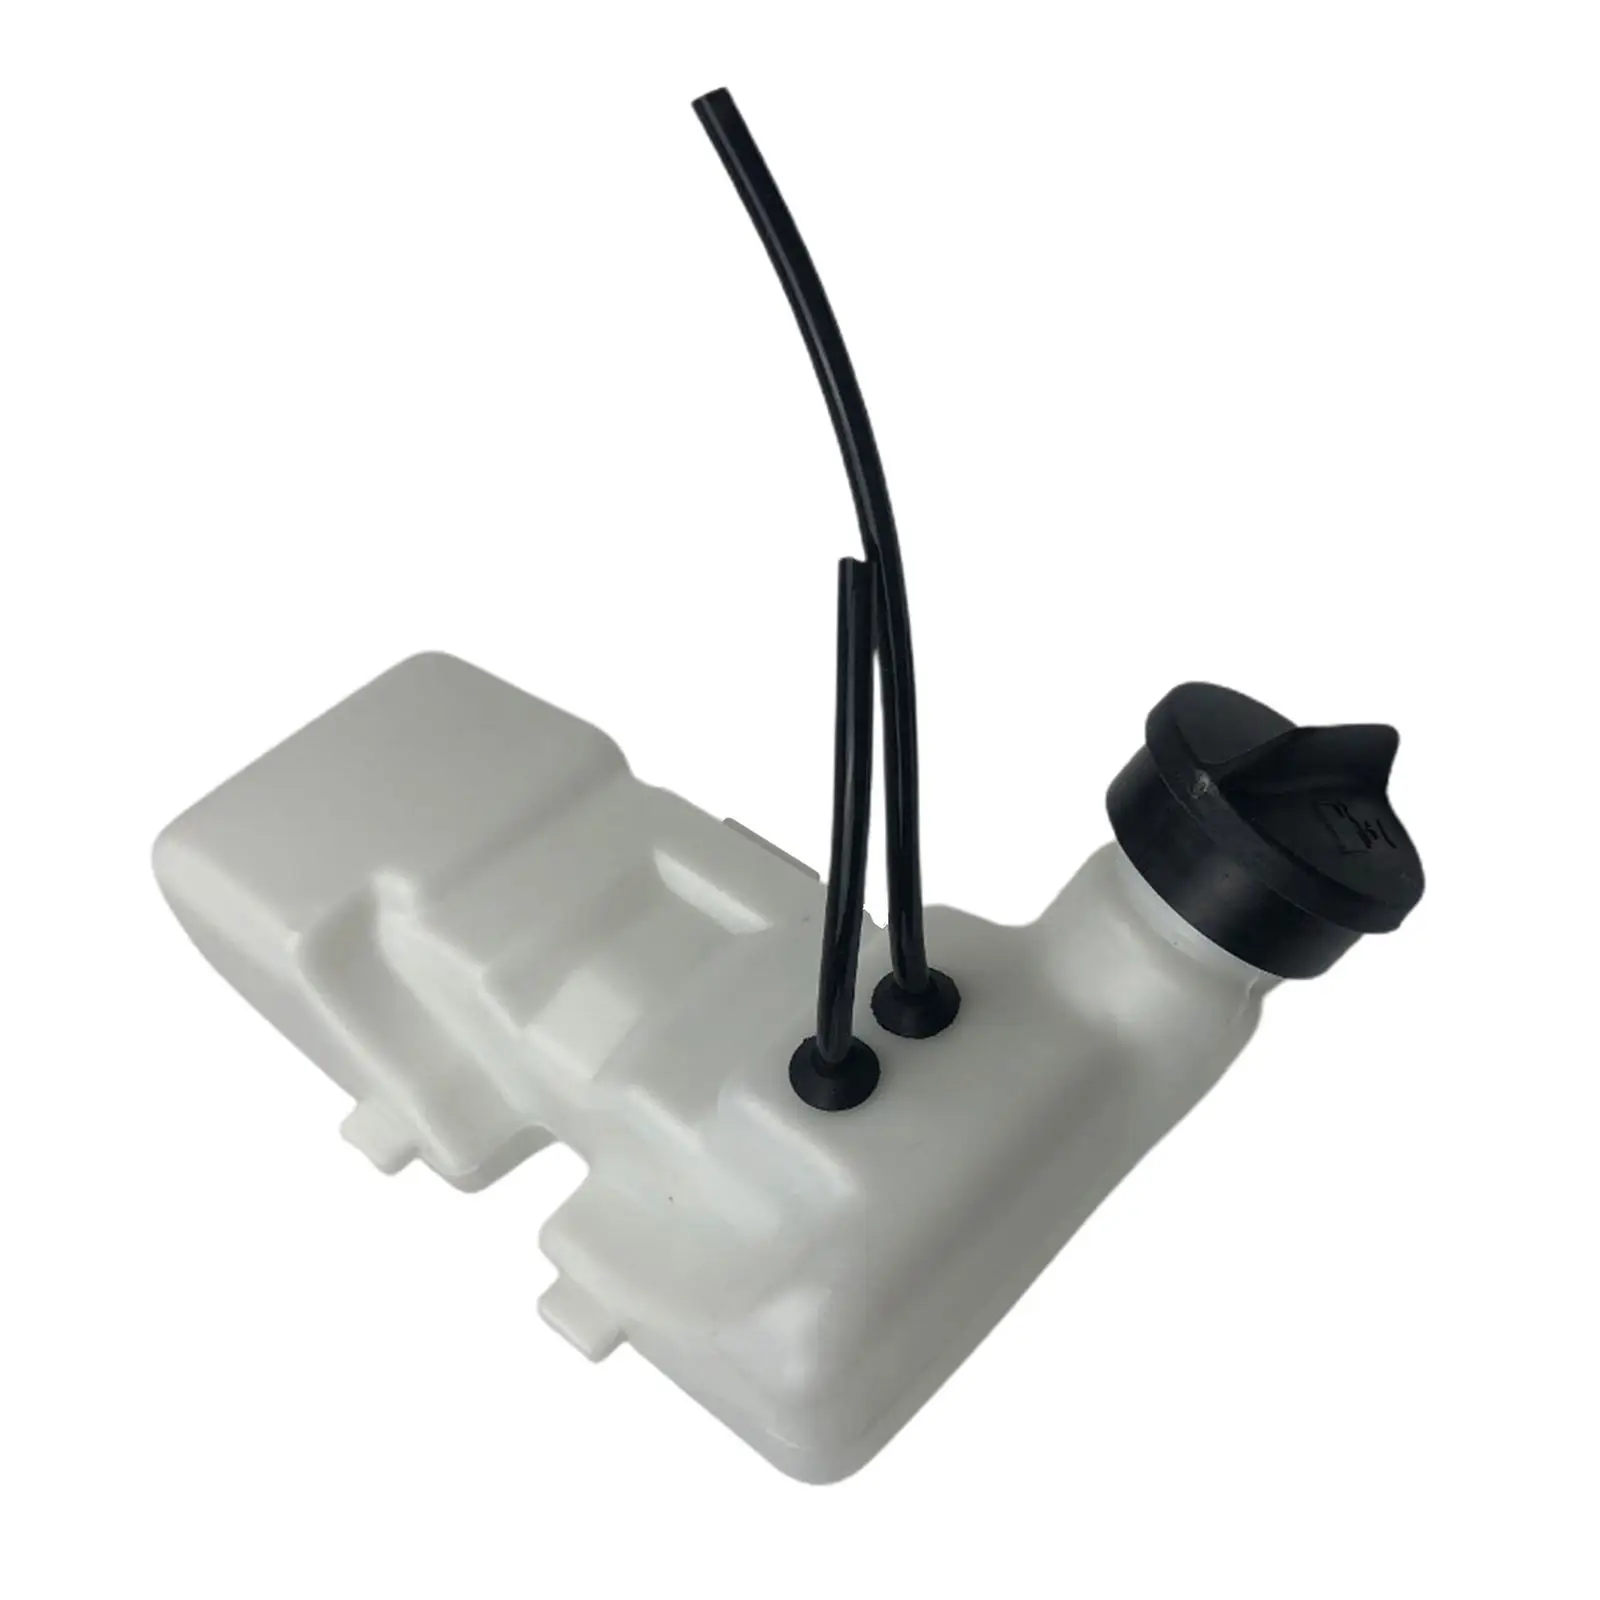 New Replacement Gas Fuel Tank with  Assembly for Stihl FS80R FS80 FS75 FS76 FS74 FS72 FS85 KM85 HT75 Trimmer Parts